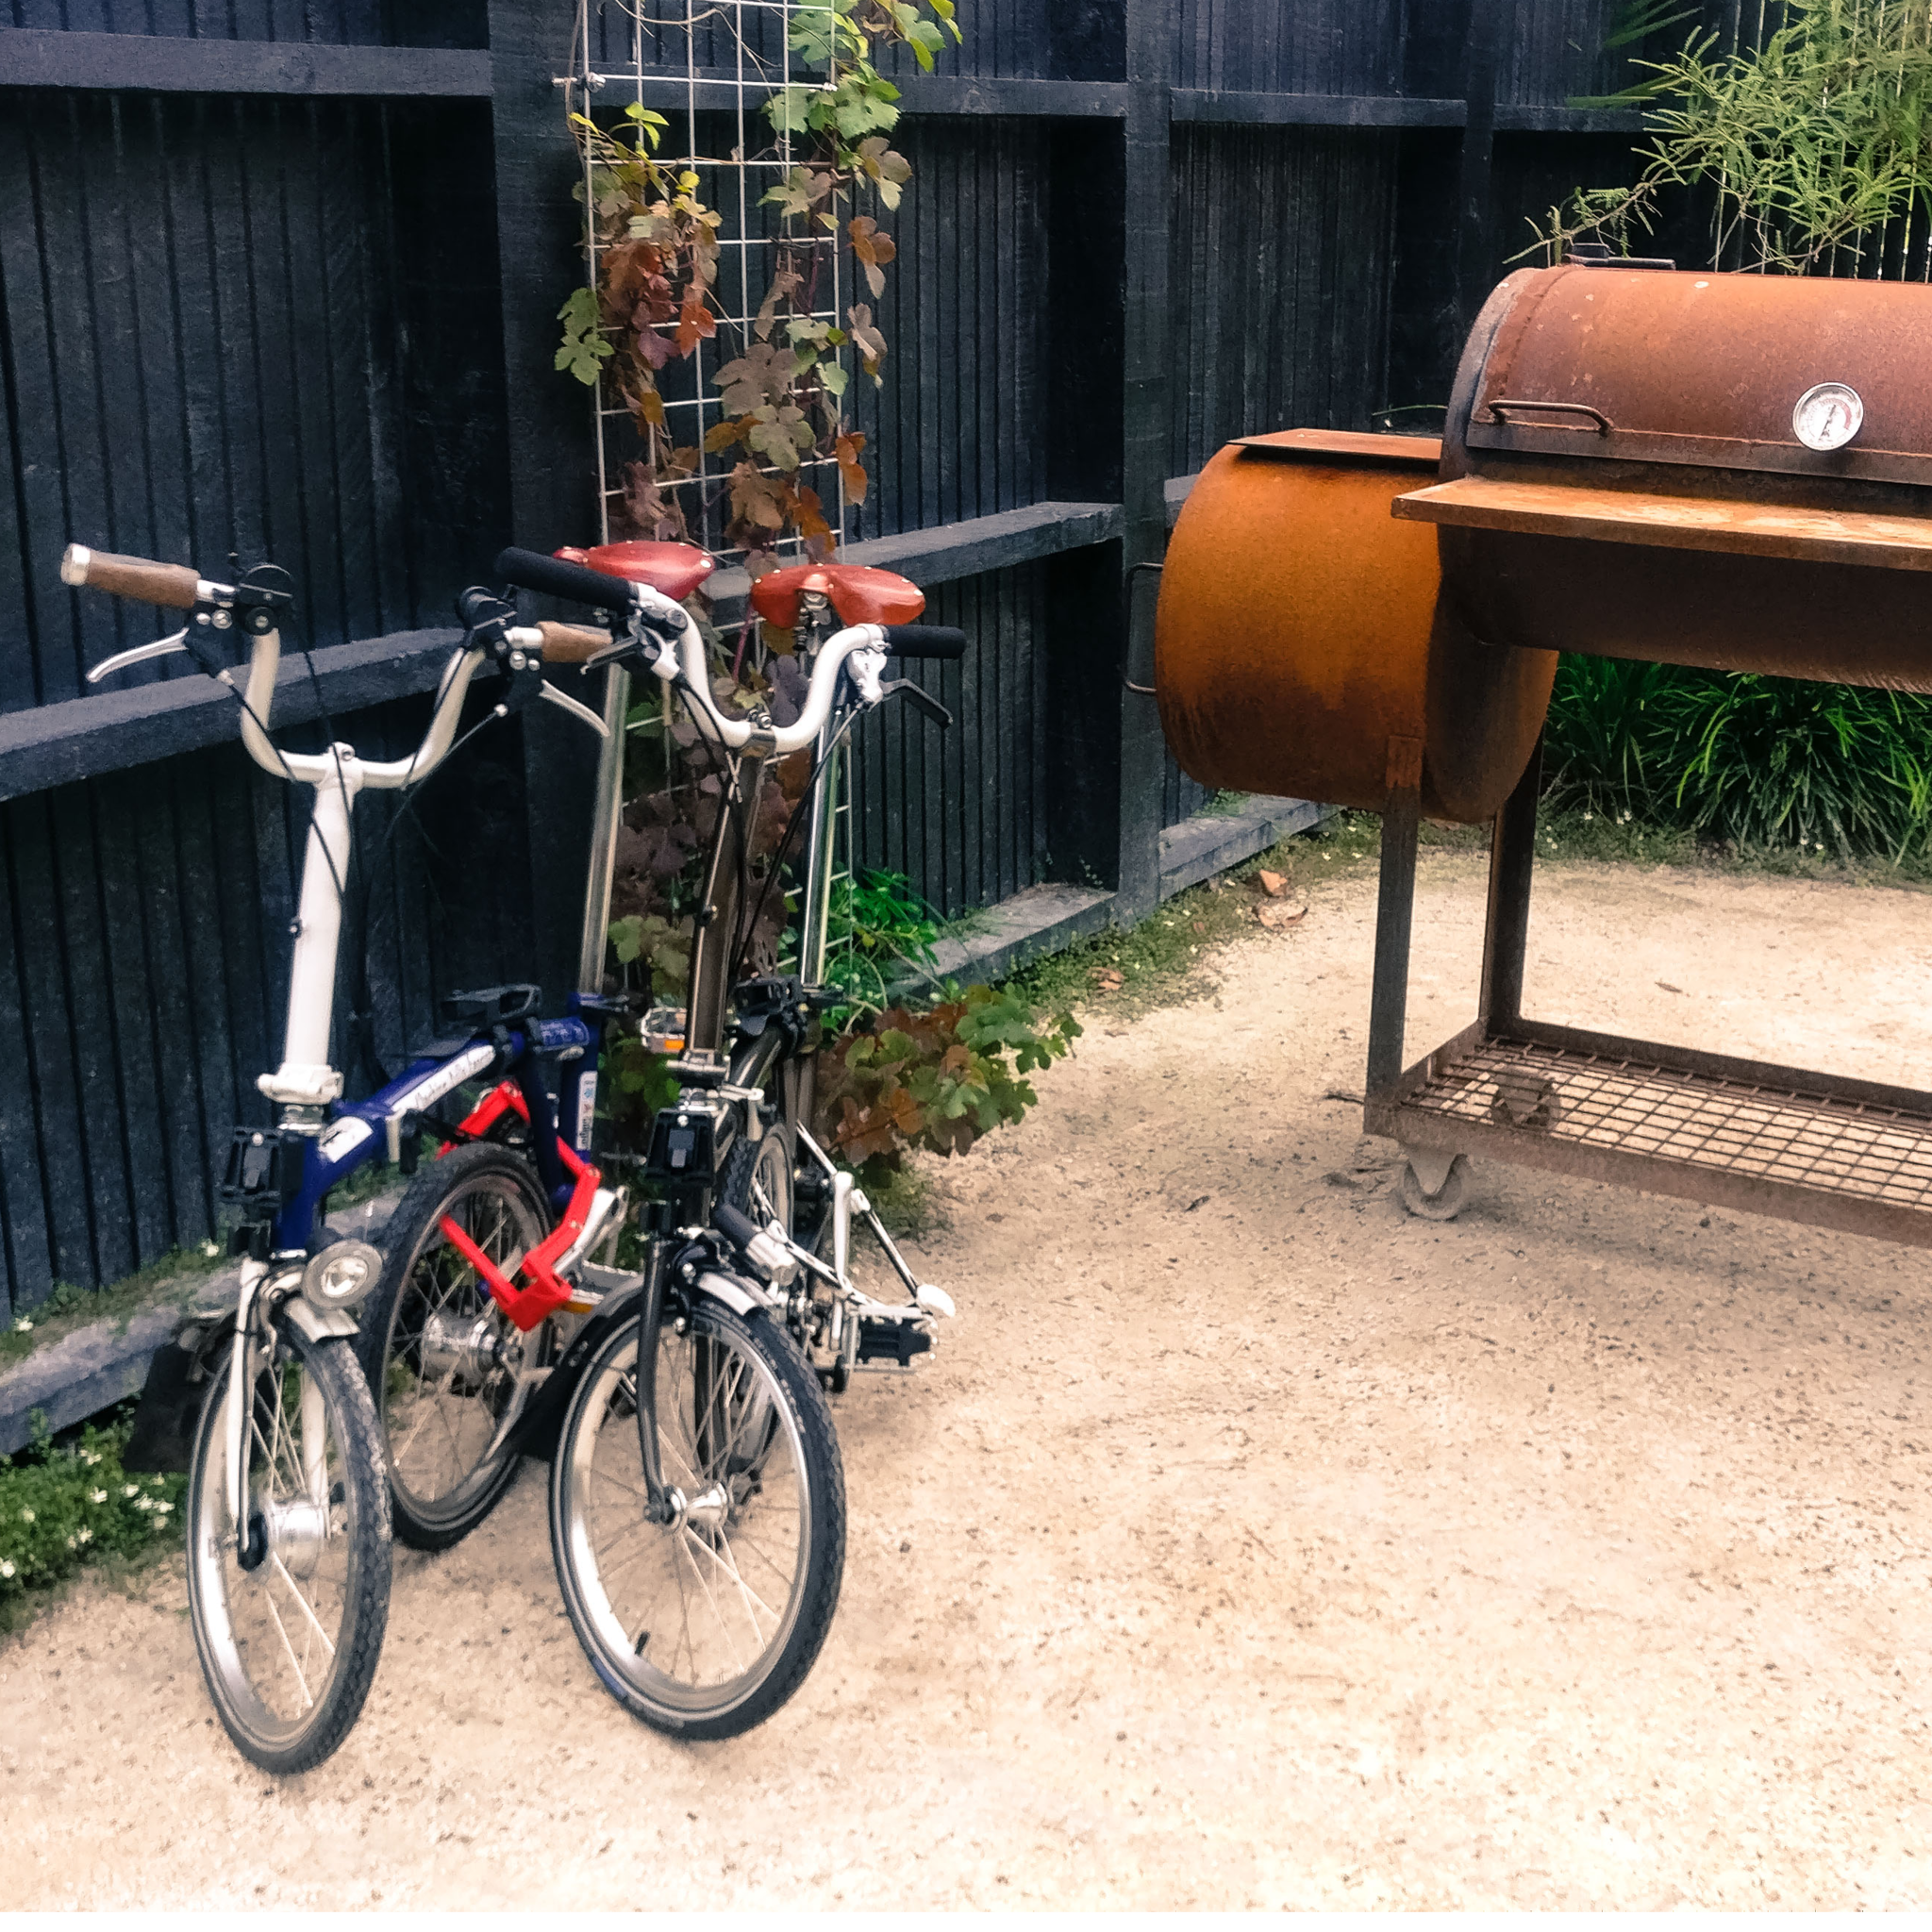 Two Bromptons next to a classic barbeque.